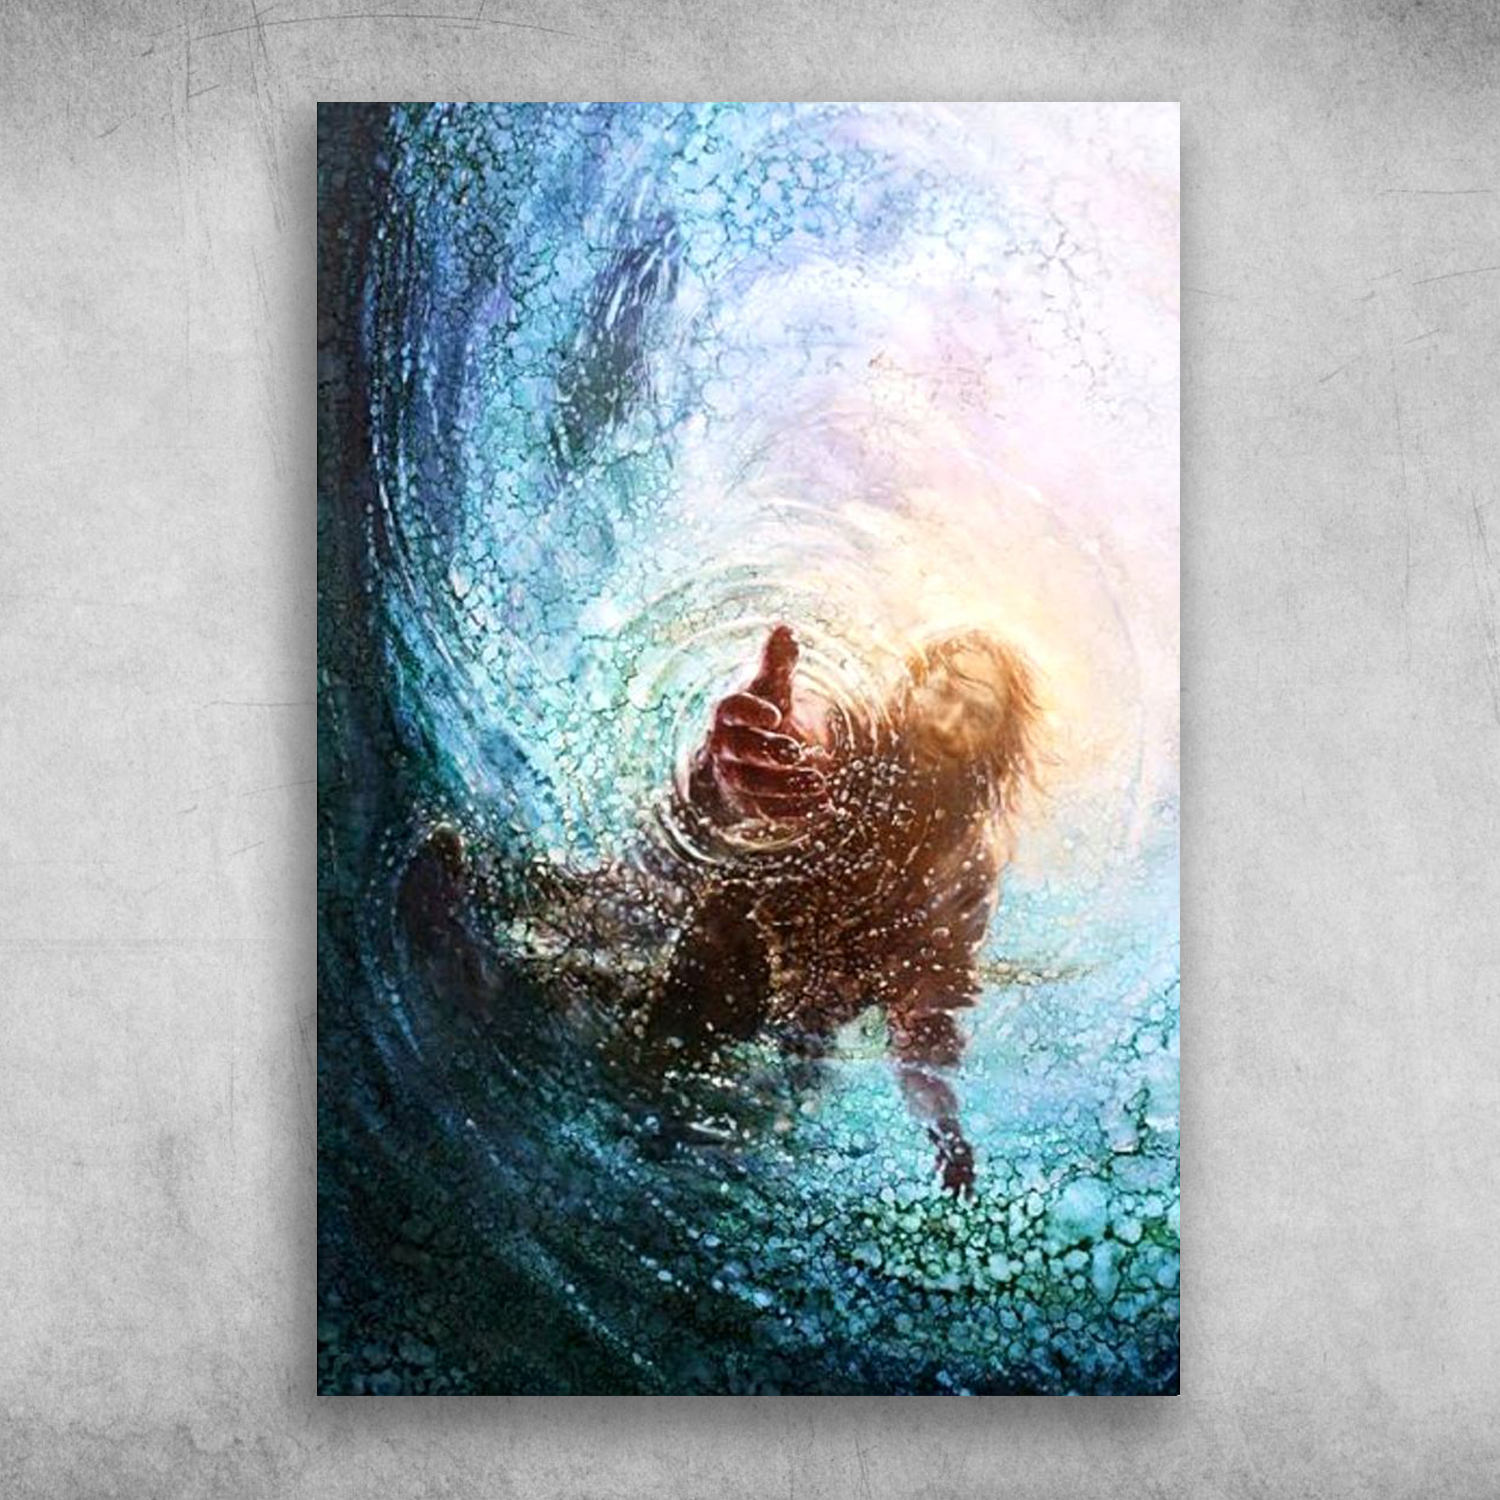 The Hand Of God Painting Jesus Reaching Into Water